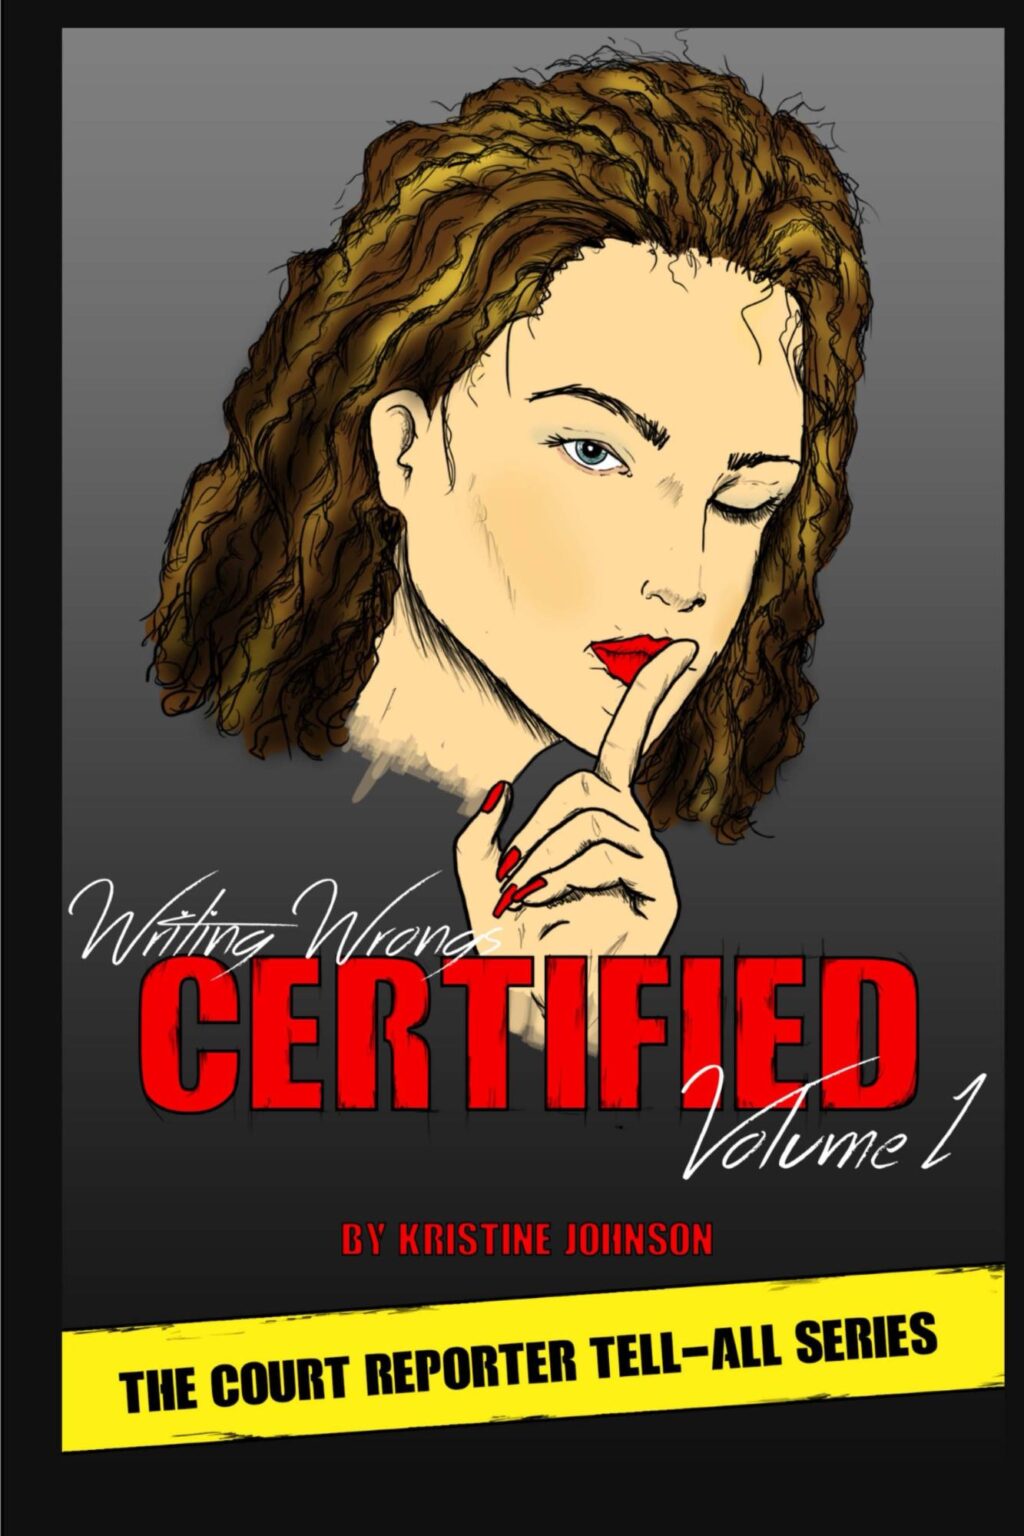 Writing_Wrongs_CERT_Cover_for_Kindle